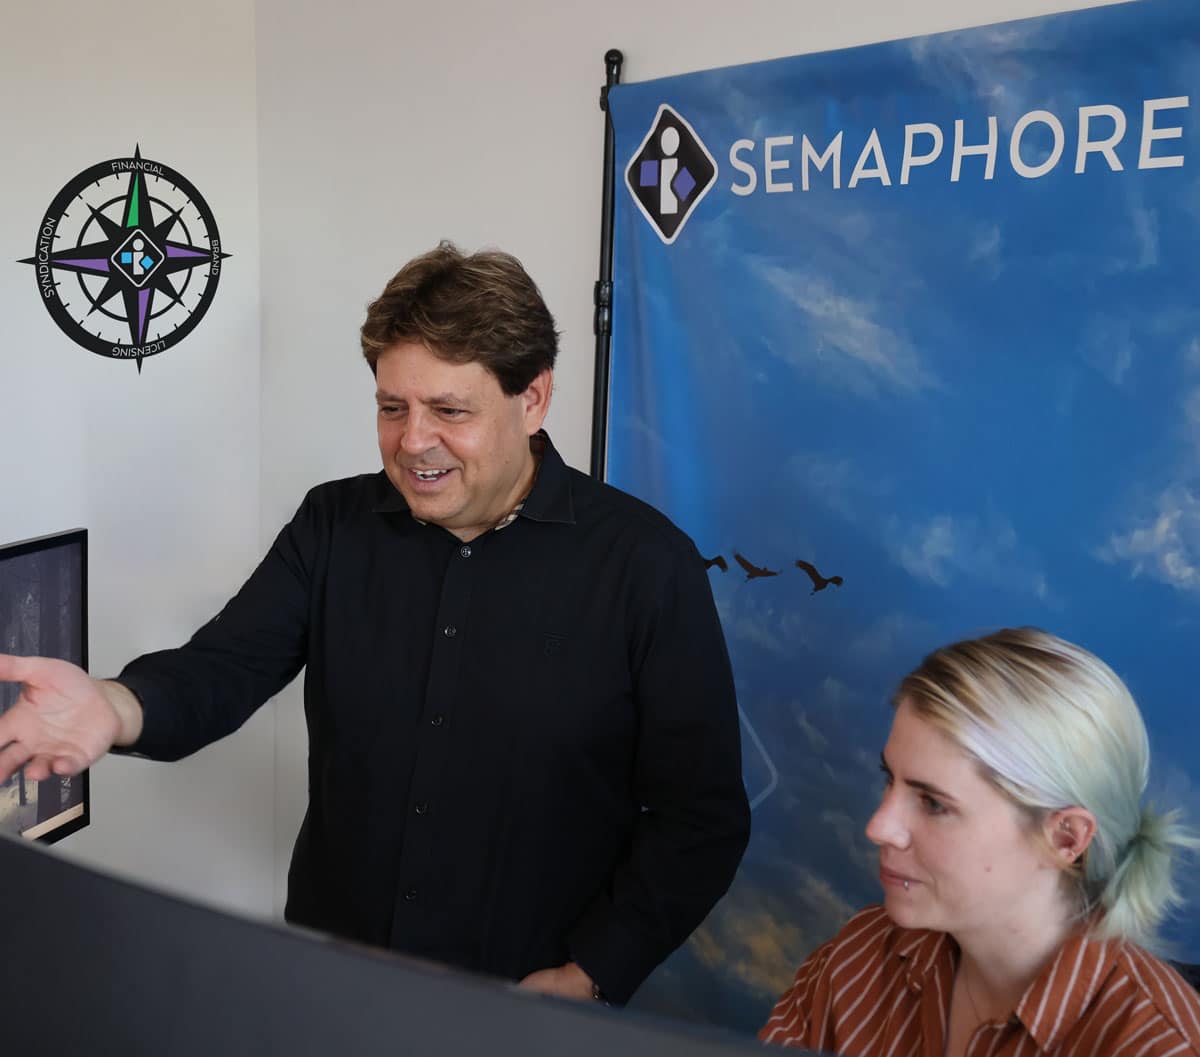 mike bienstock and employee discuss brand solutions at semaphore headquarters